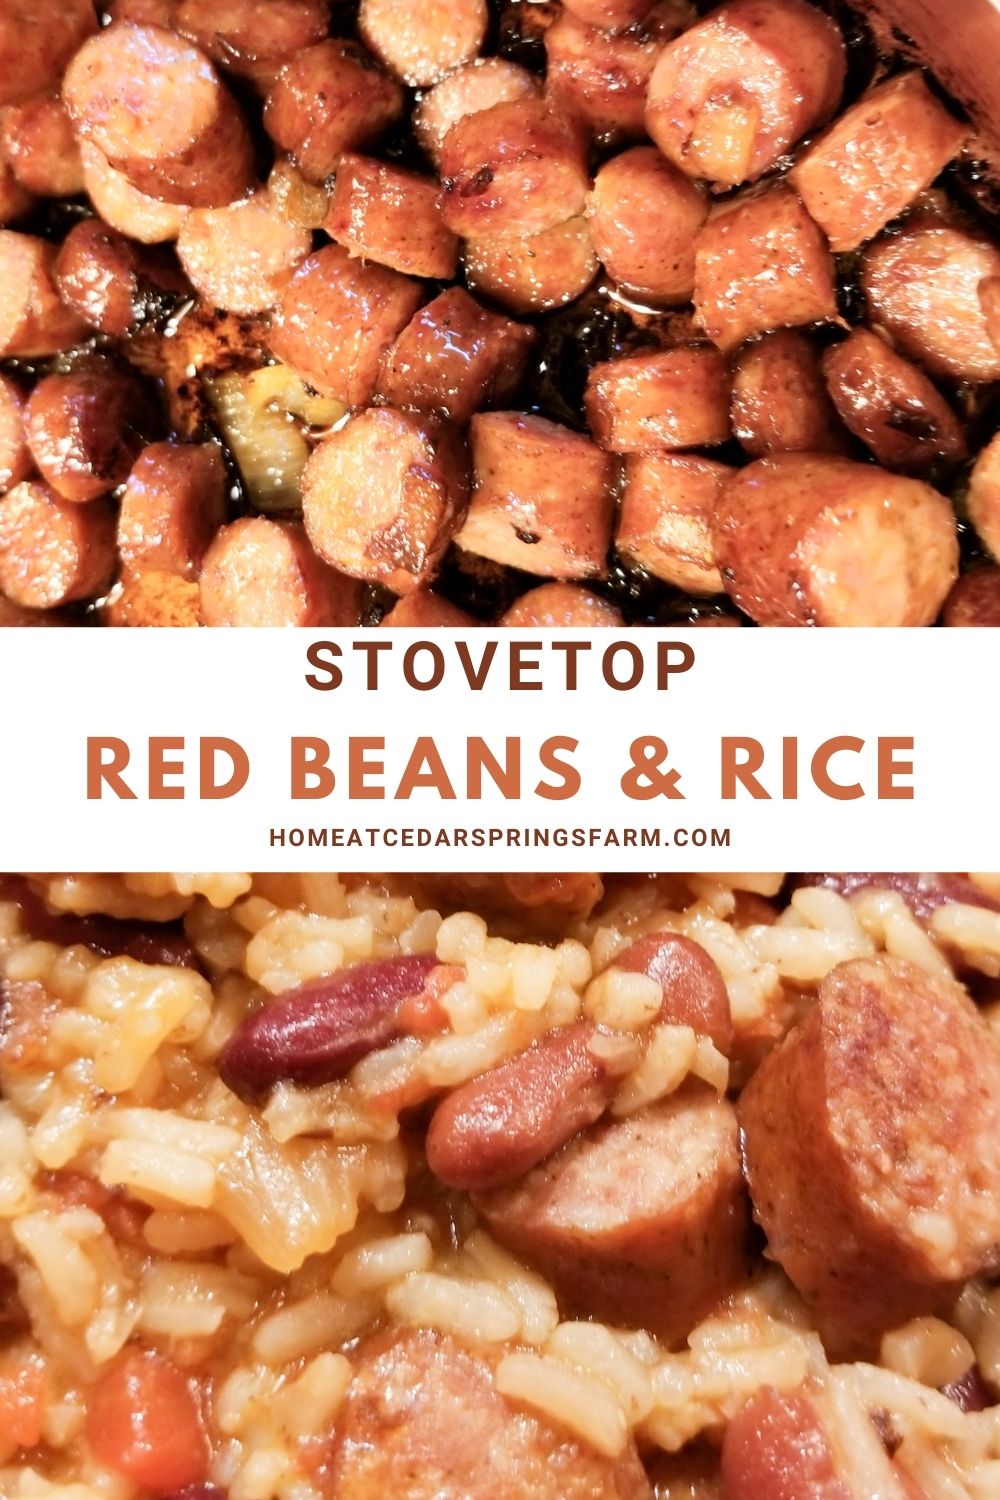 Red beans and rice picture with overlay text